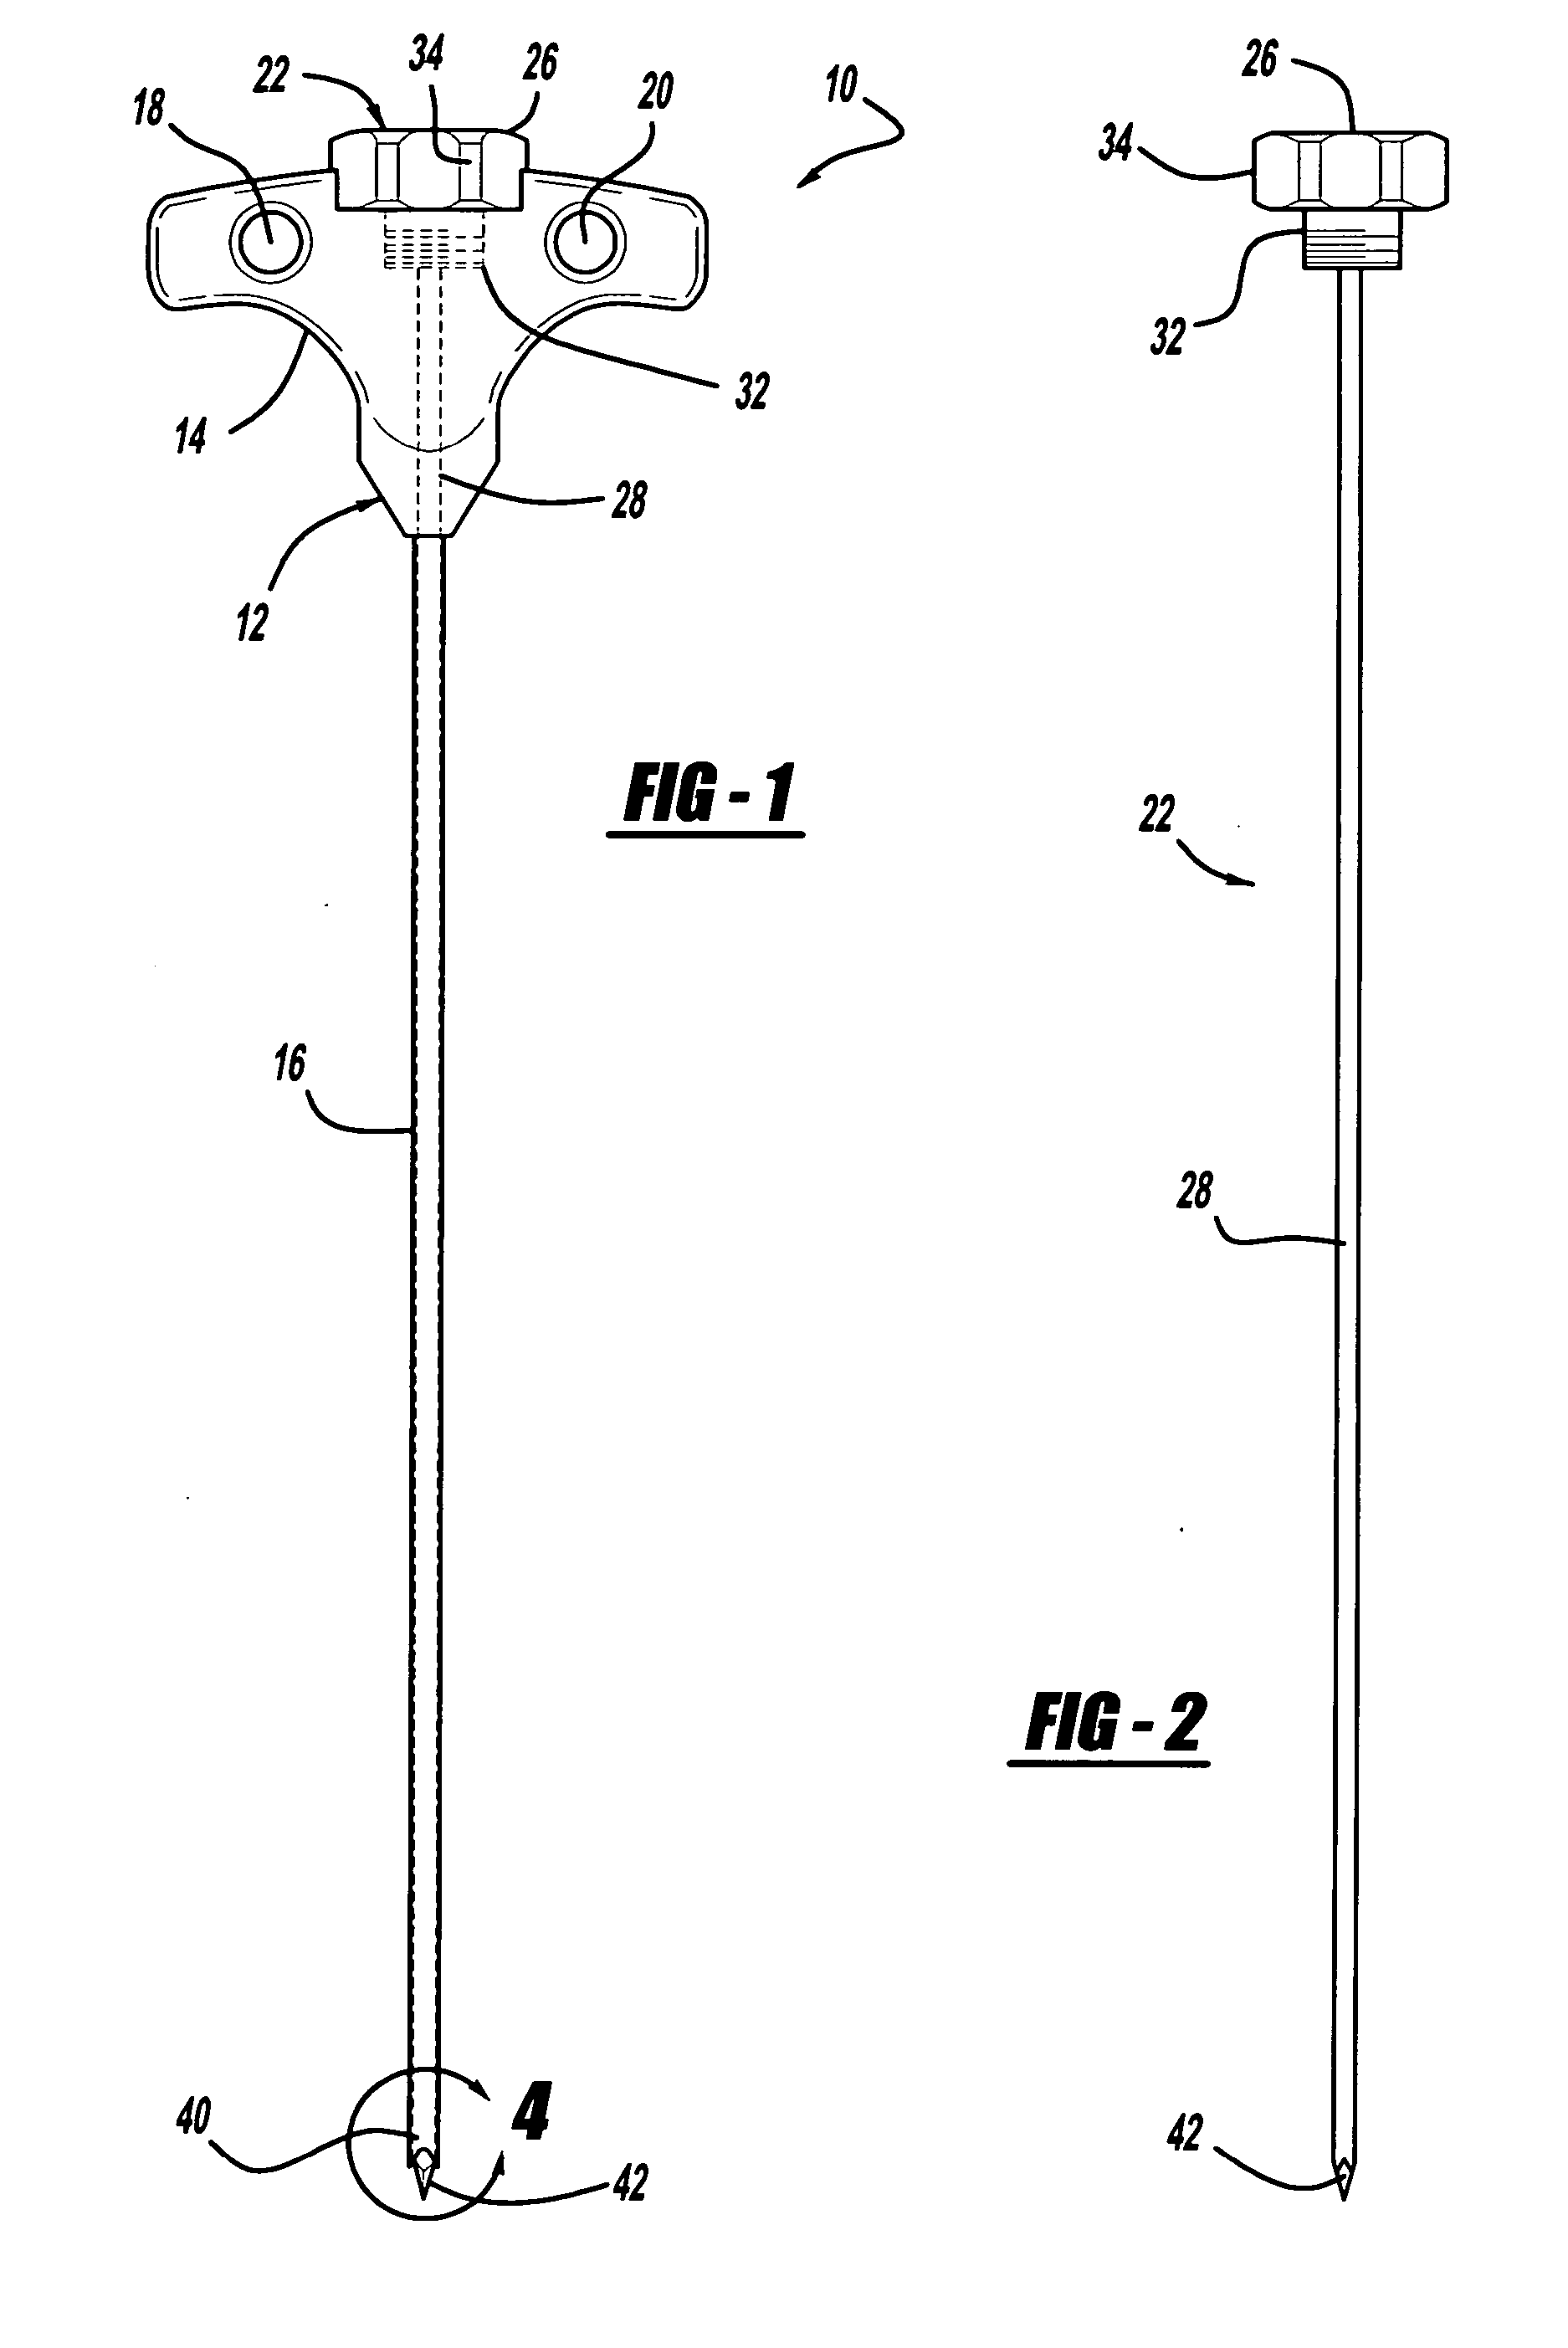 Pedicle access device